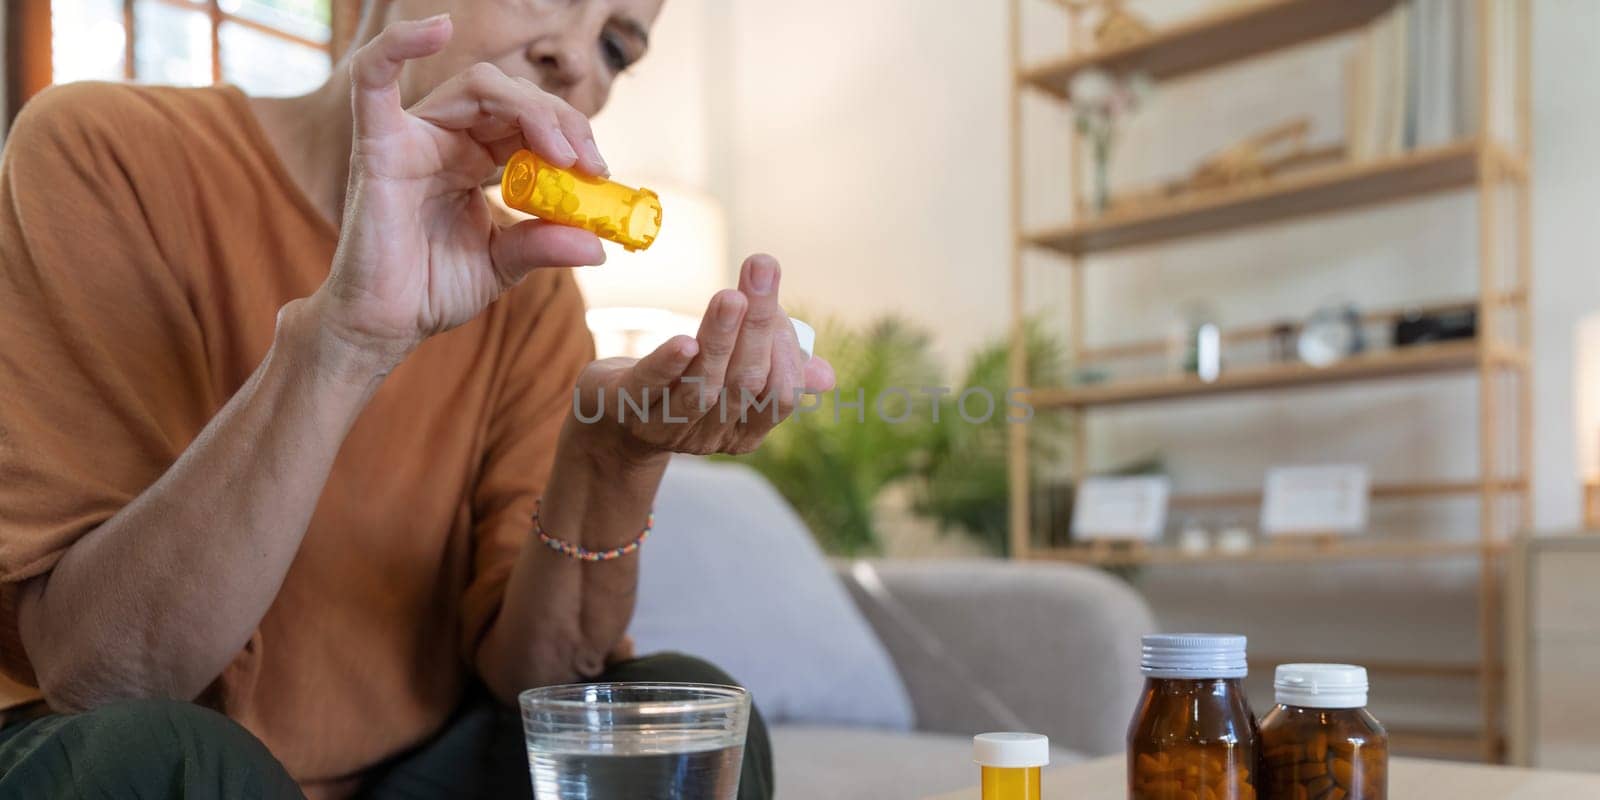 Medicine and healthcare of senior woman taking daily pill for ill, medication and sick elderly with medical drugs, vitamin or supplement in his hand.